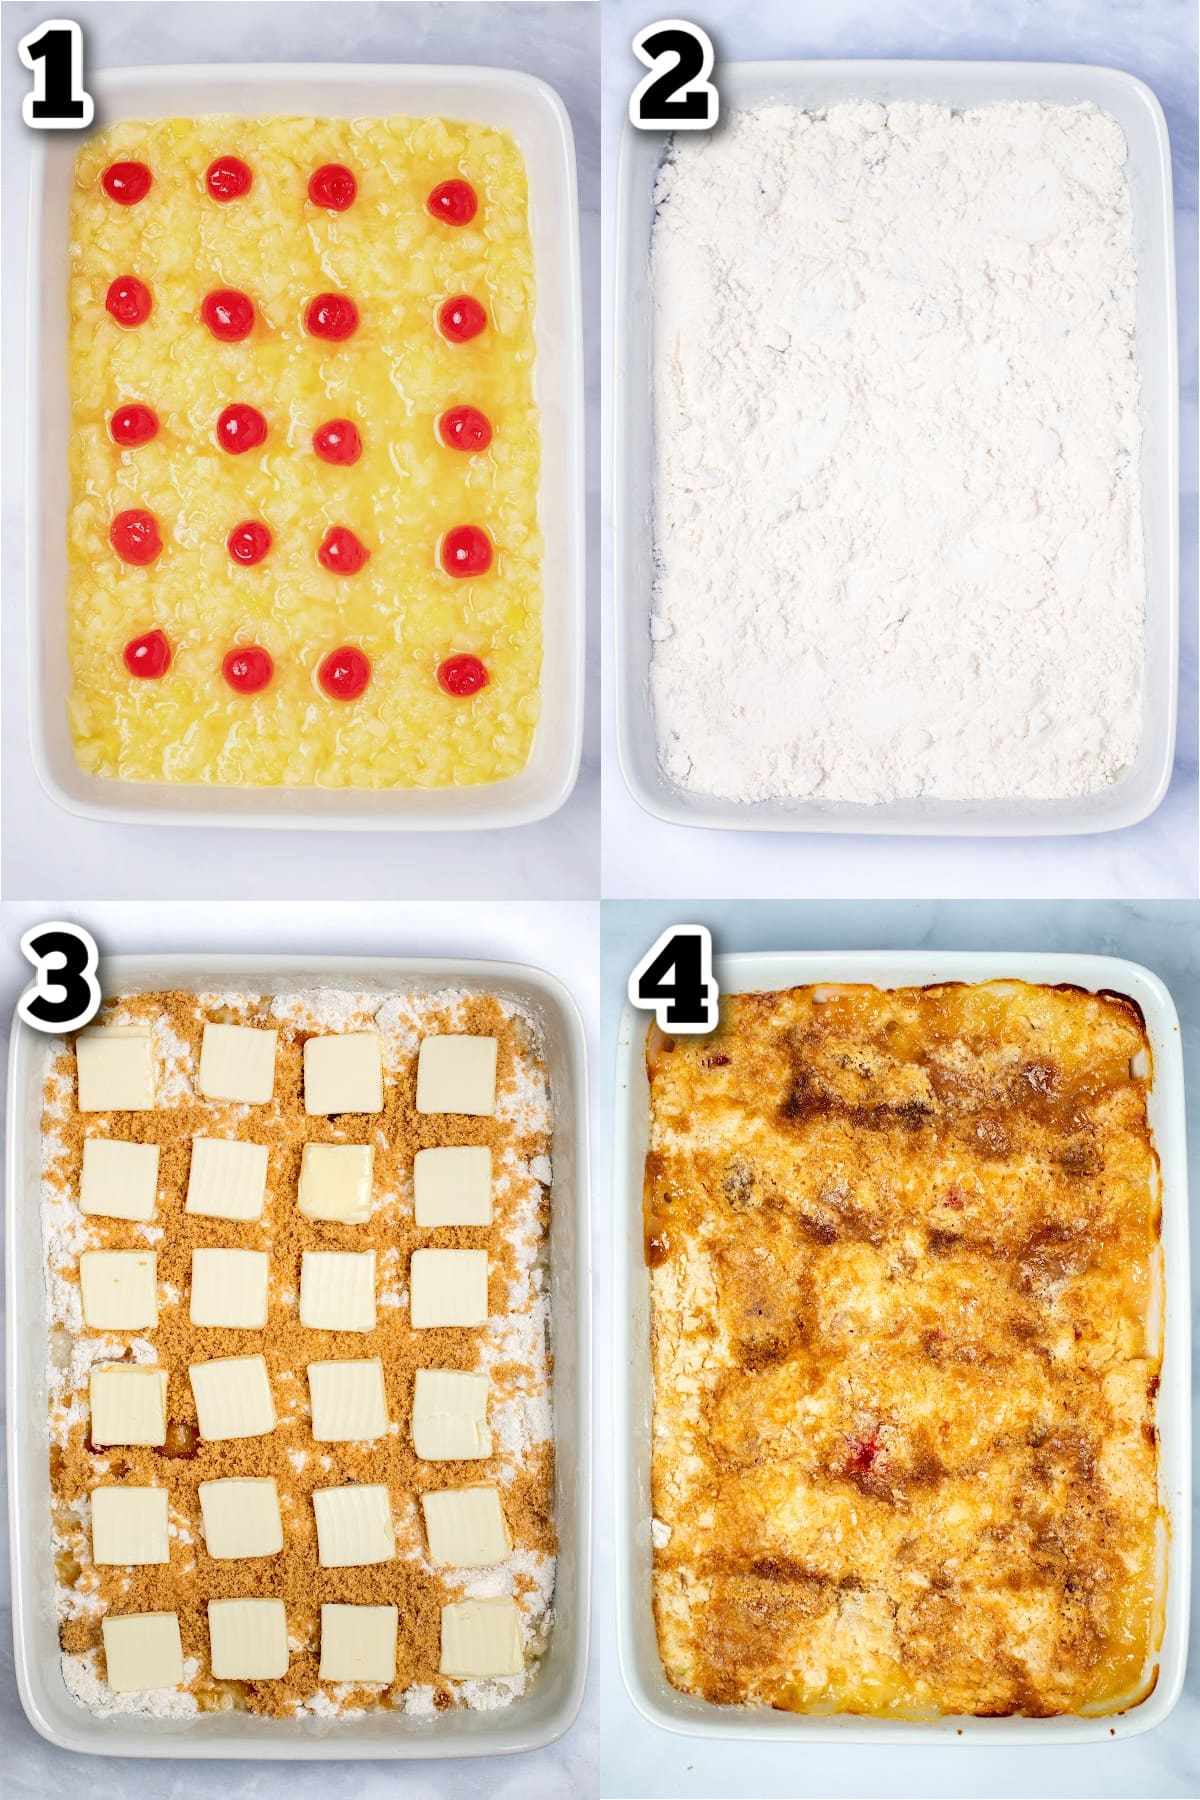 Step by step photos for how to make pineapple dump cake.